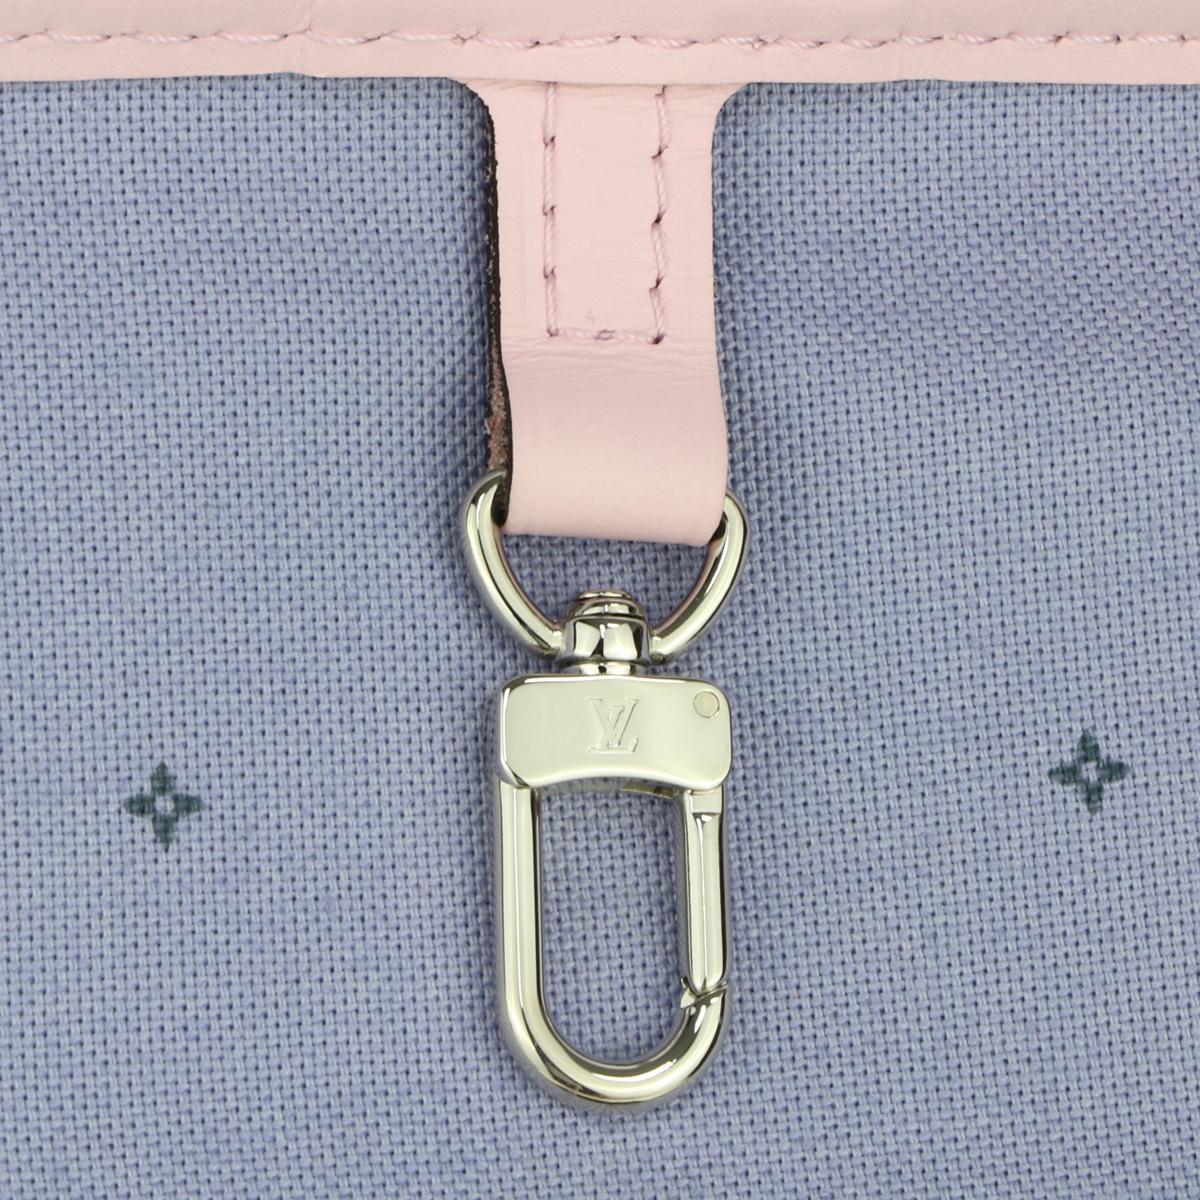 Louis Vuitton Escale Neverfull MM Bag in Pastel 2020 Limited Edition For Sale 6